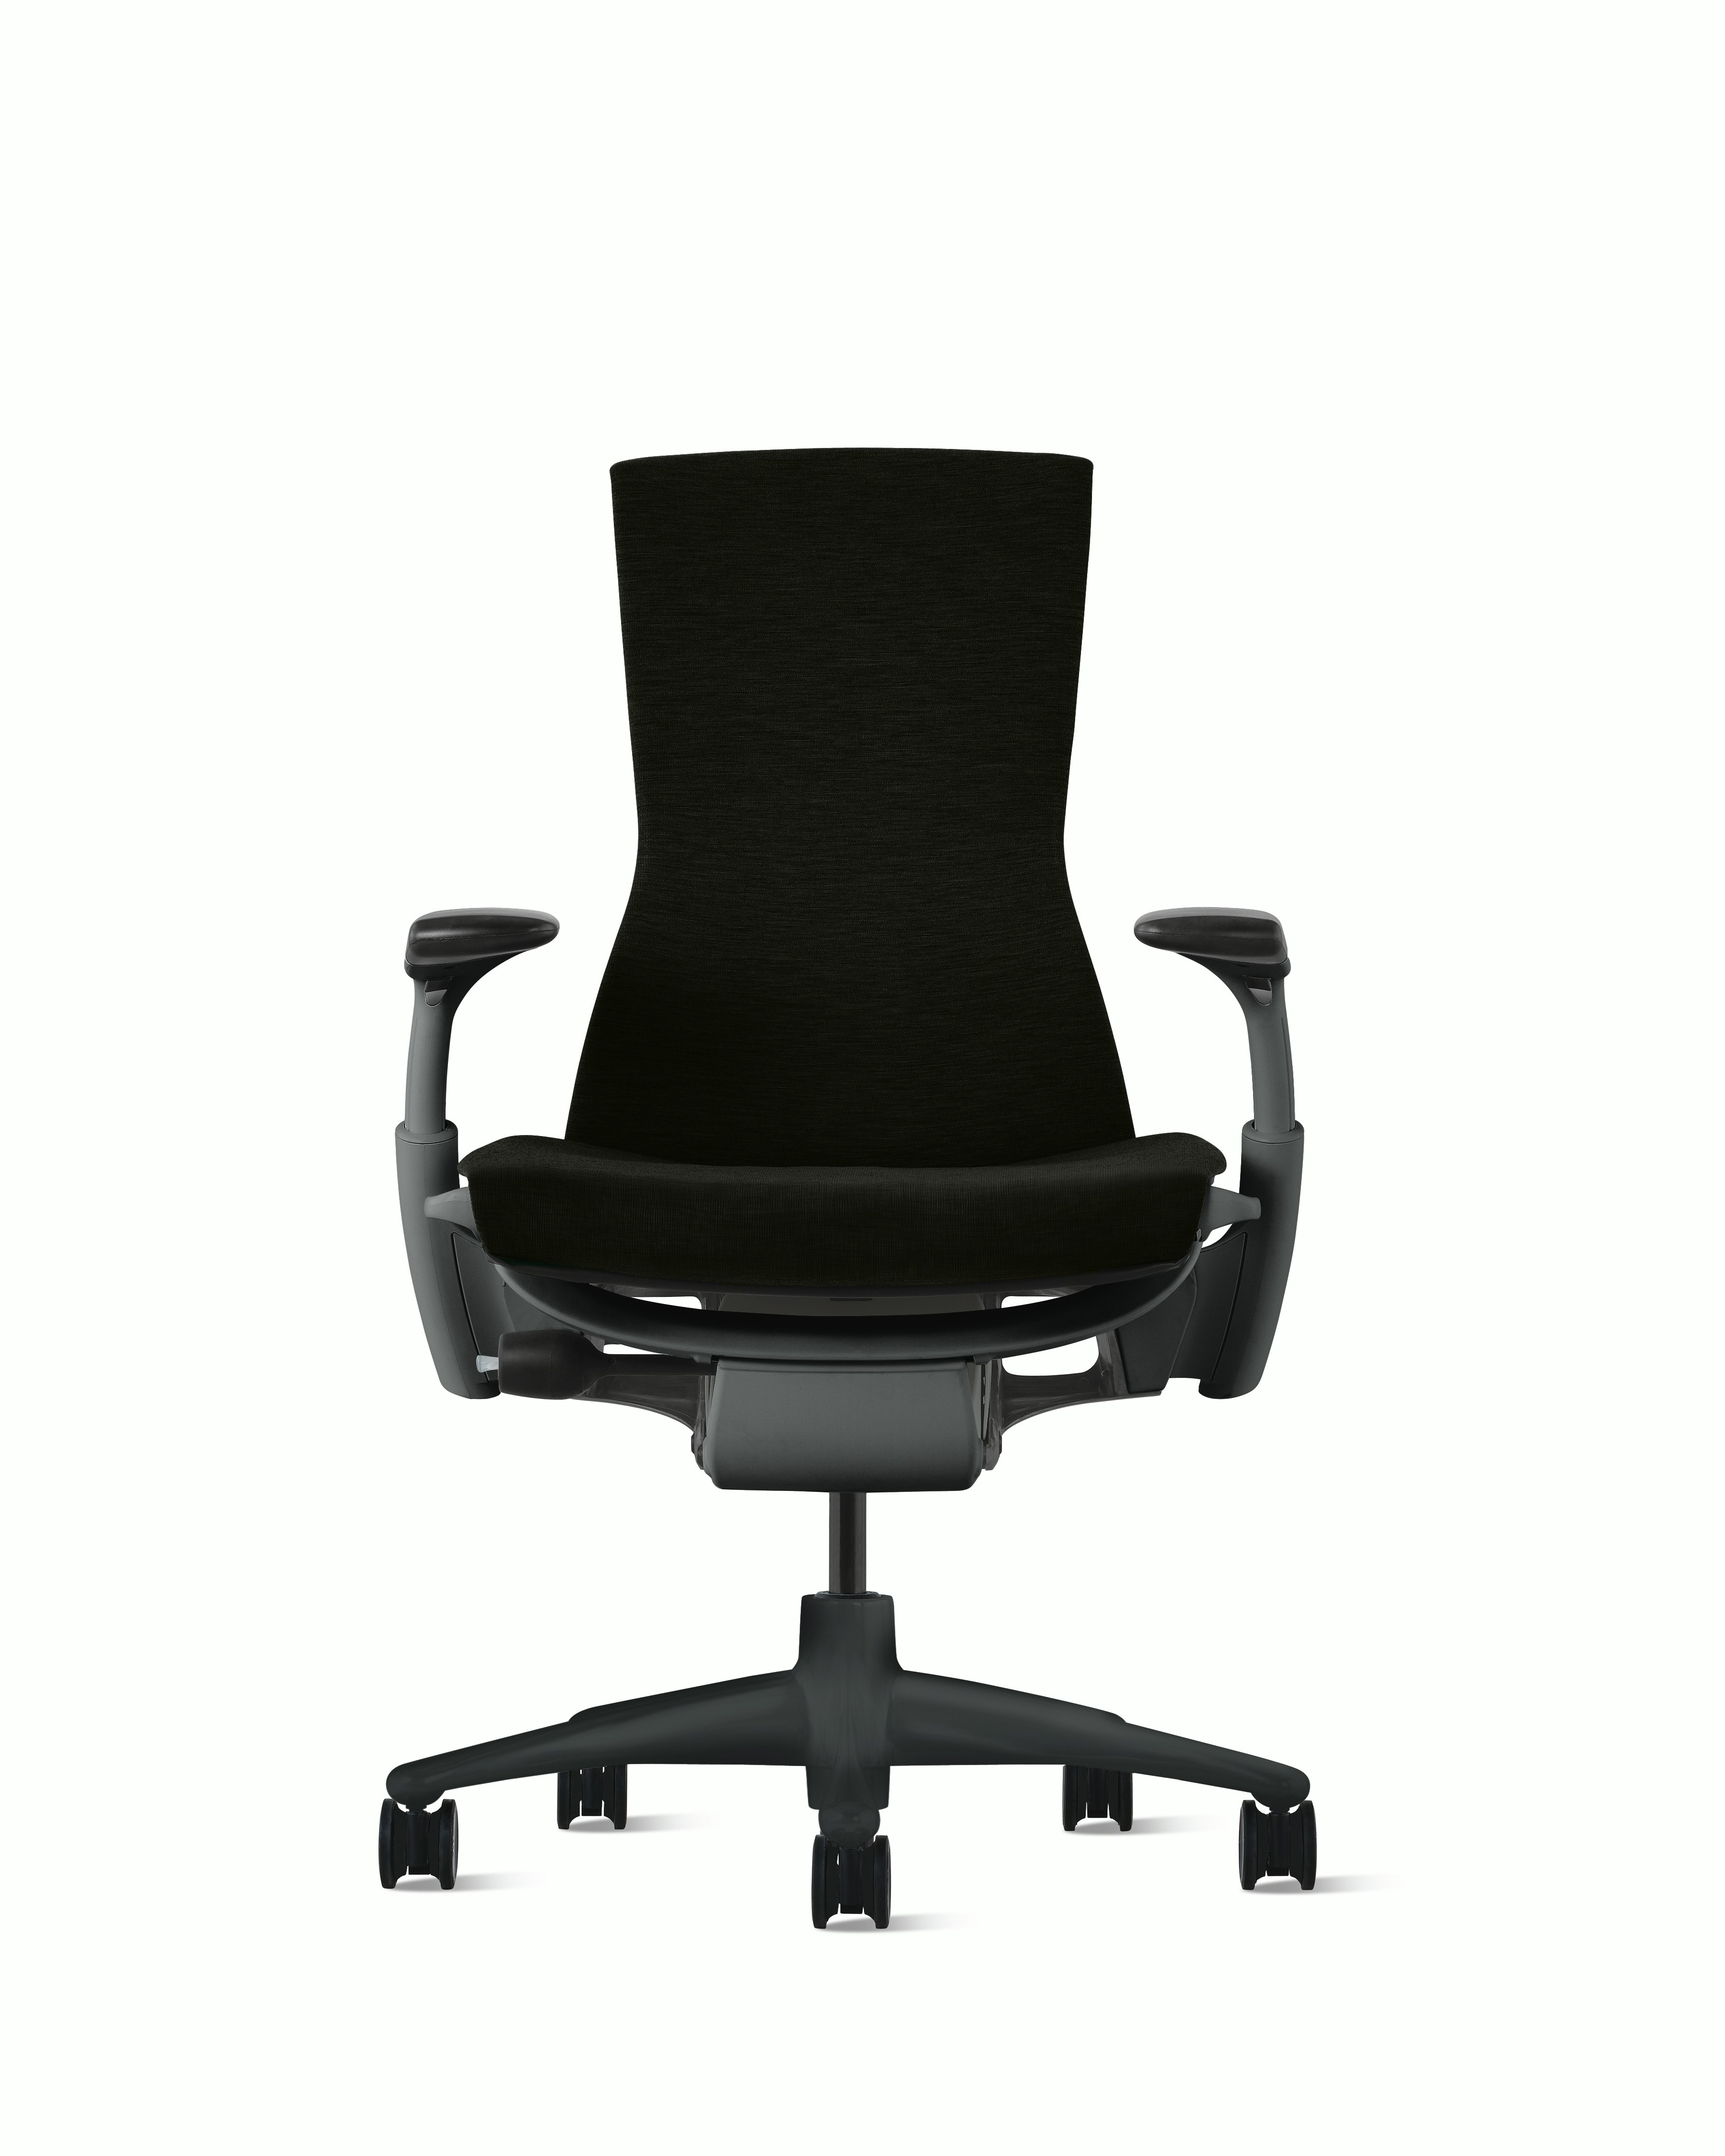 NEW Herman Miller Embody Chair fabric back and seat new black rhythm 